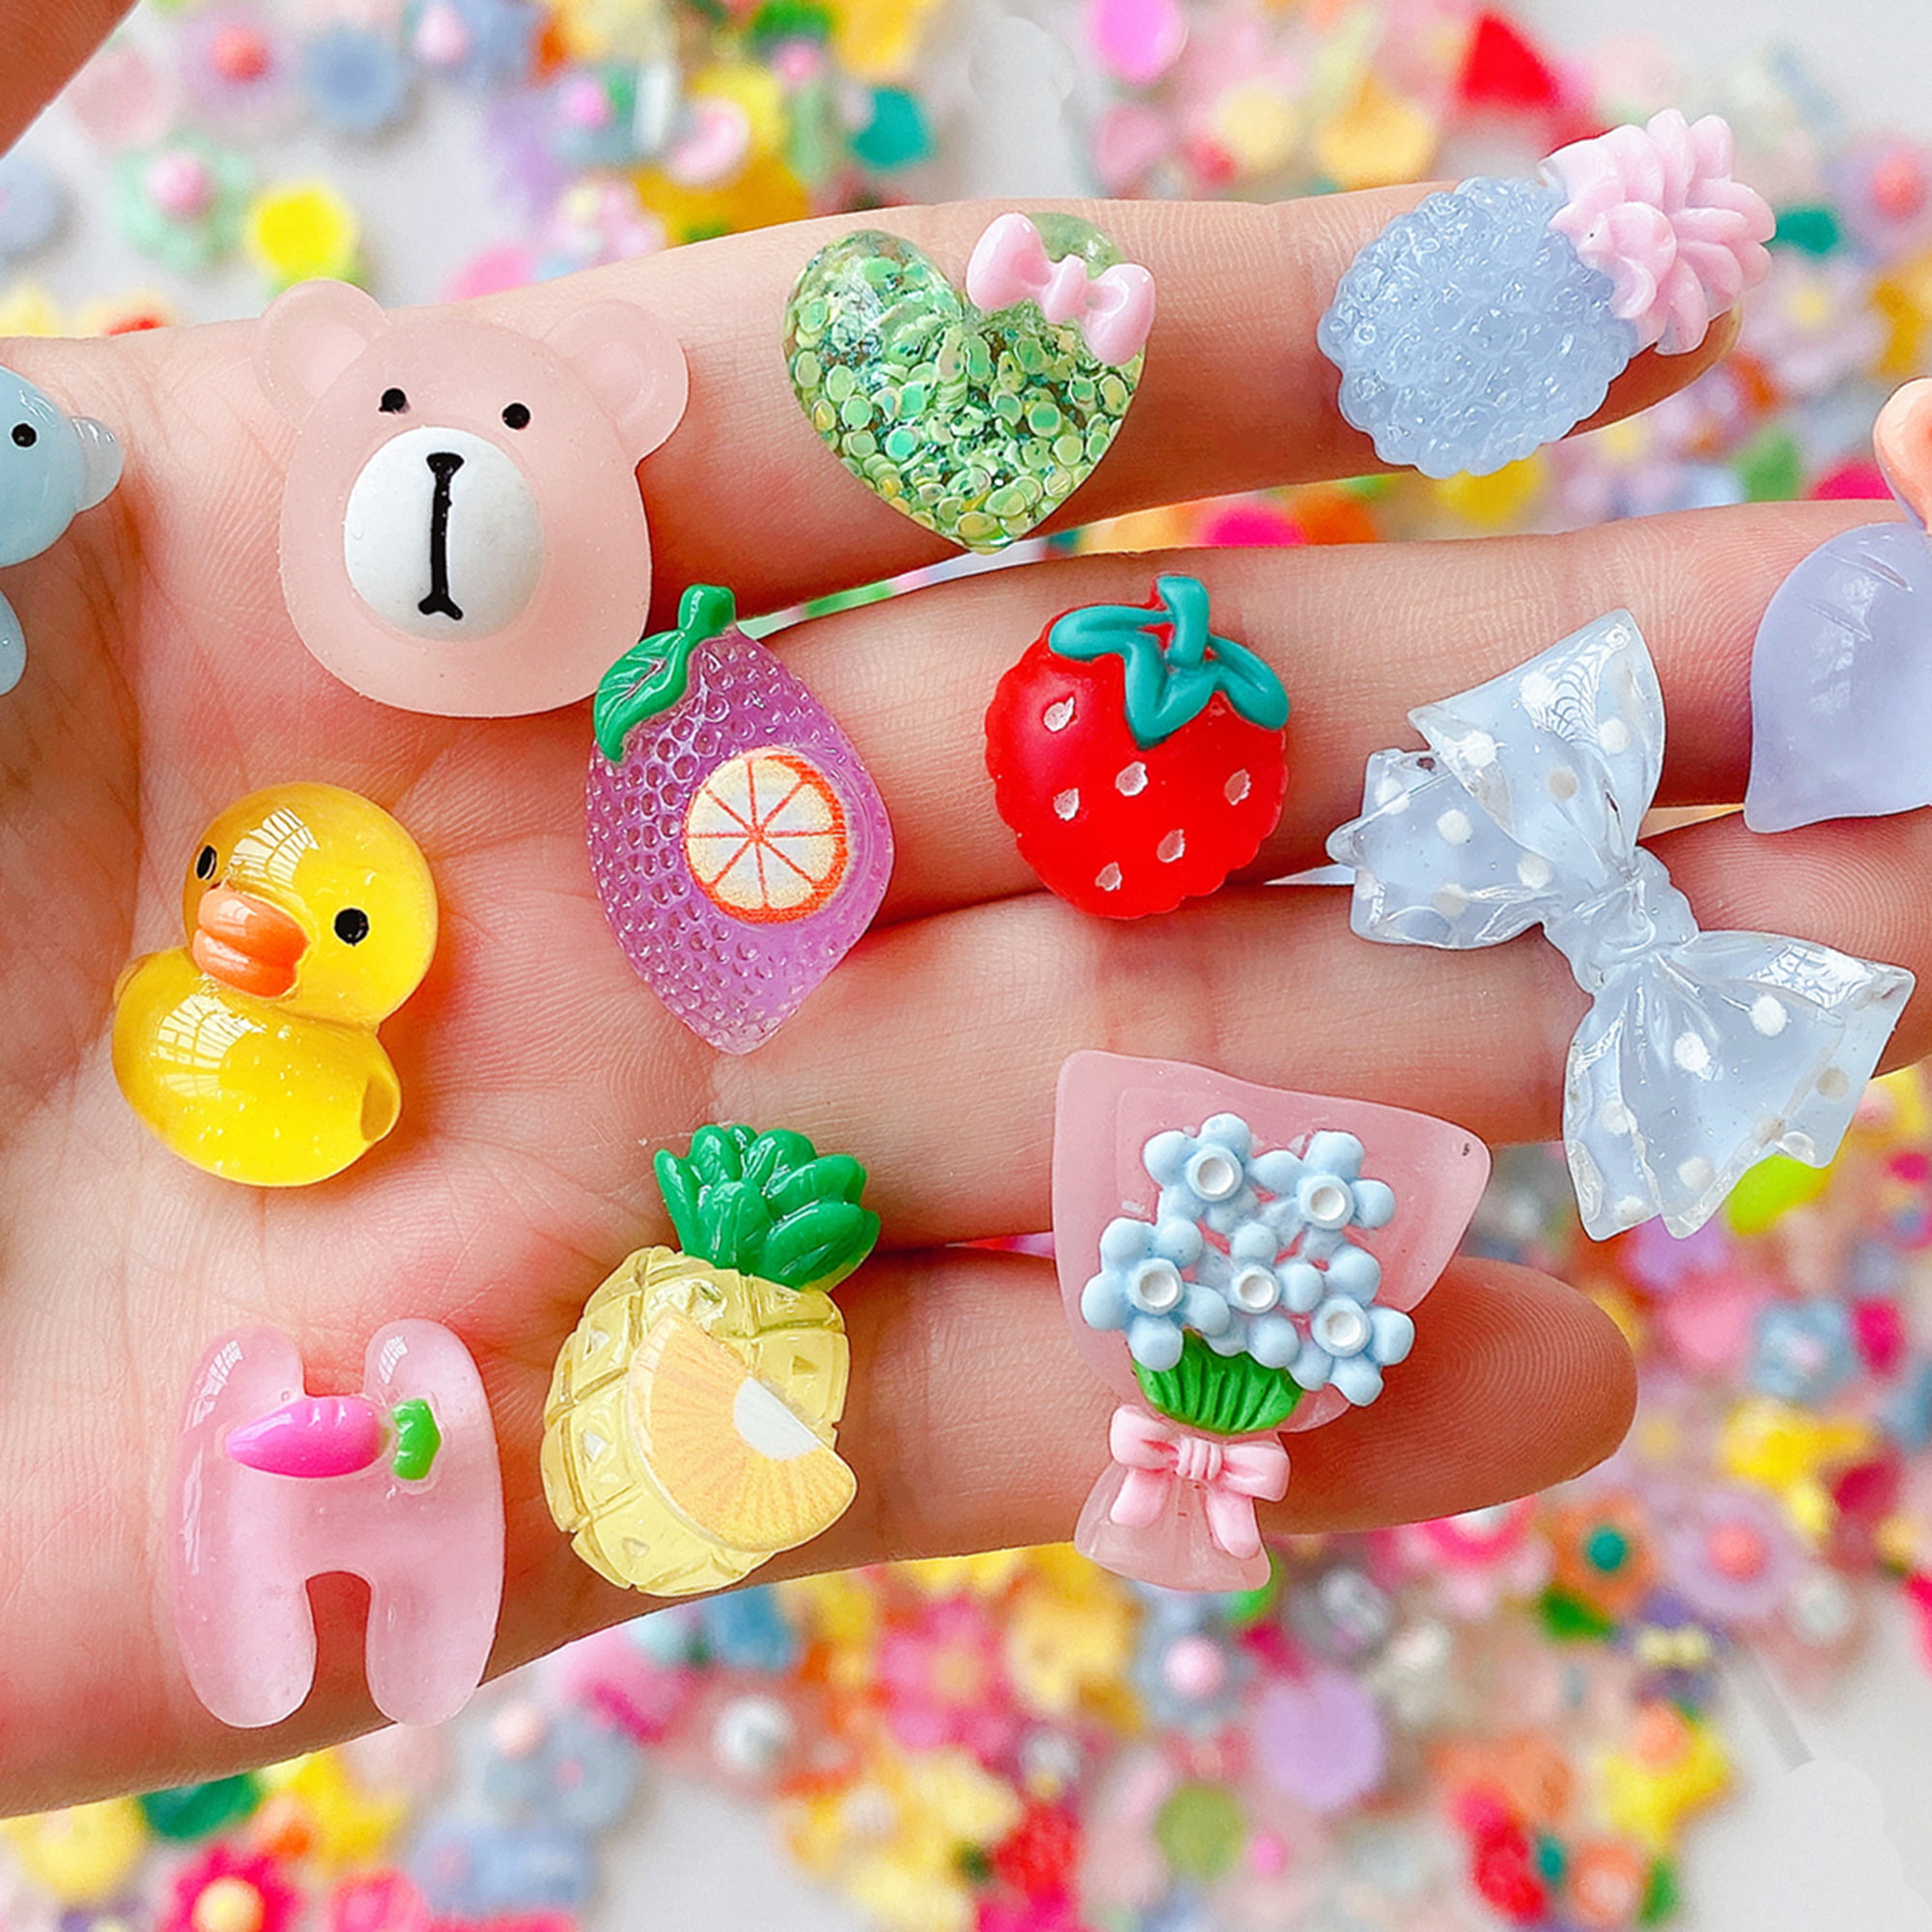 500ml Stretchy Kawaii Polymer Clay Slime Charms DIY Cute Individuality Toys  For Kids Elasticity Relief Stress Gift 201226 From Bai09, $22.77